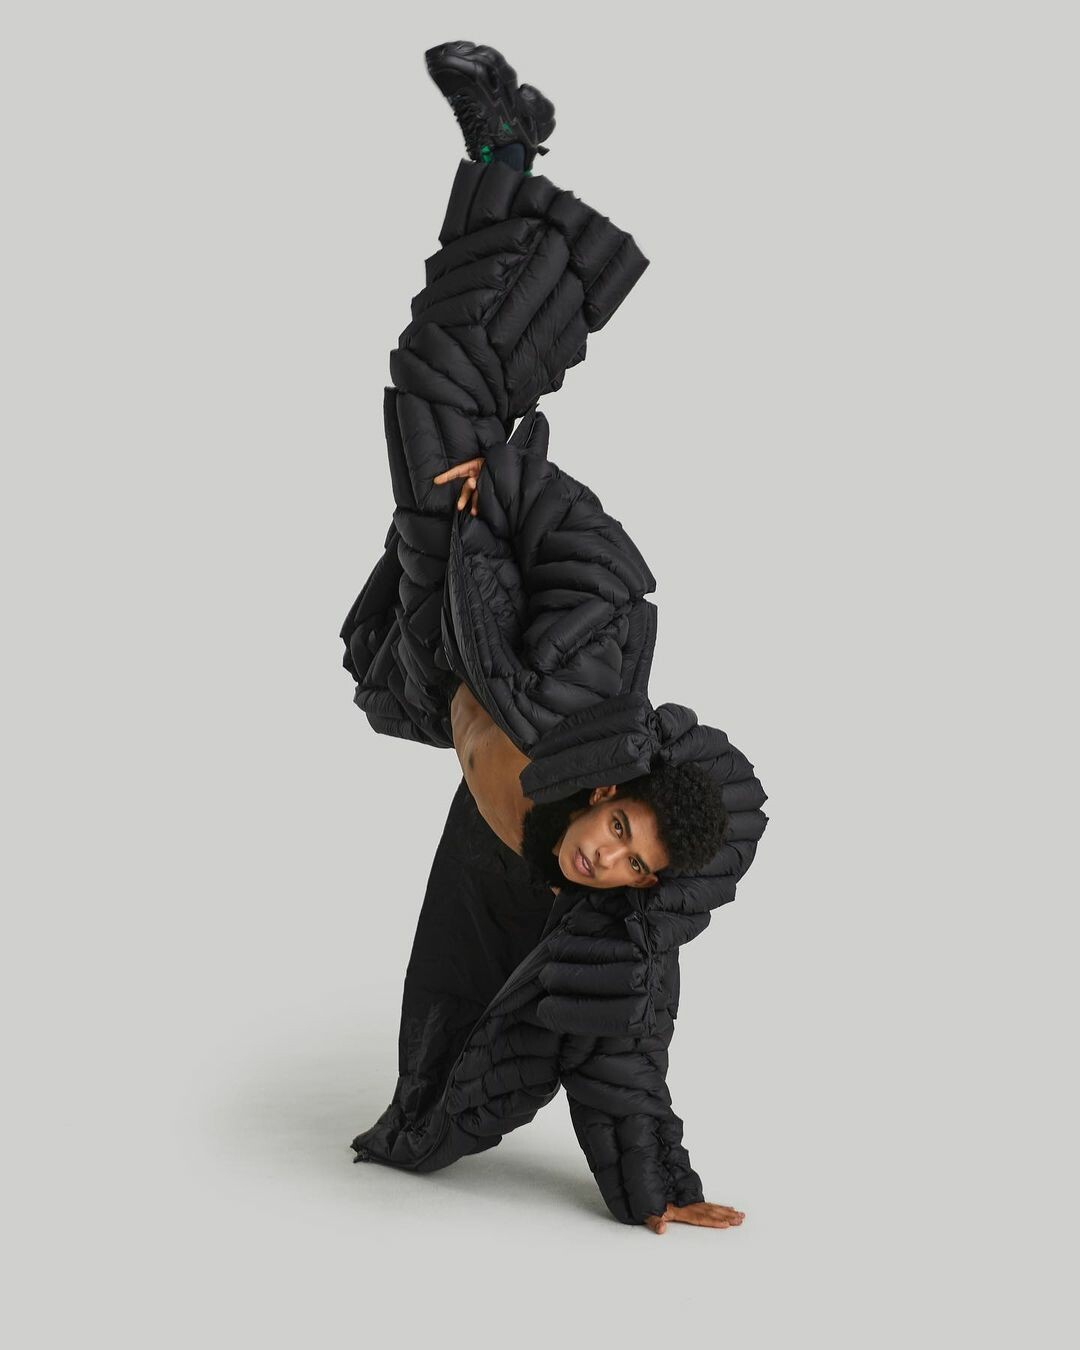 Male model balancing on one hand in black puffer suit